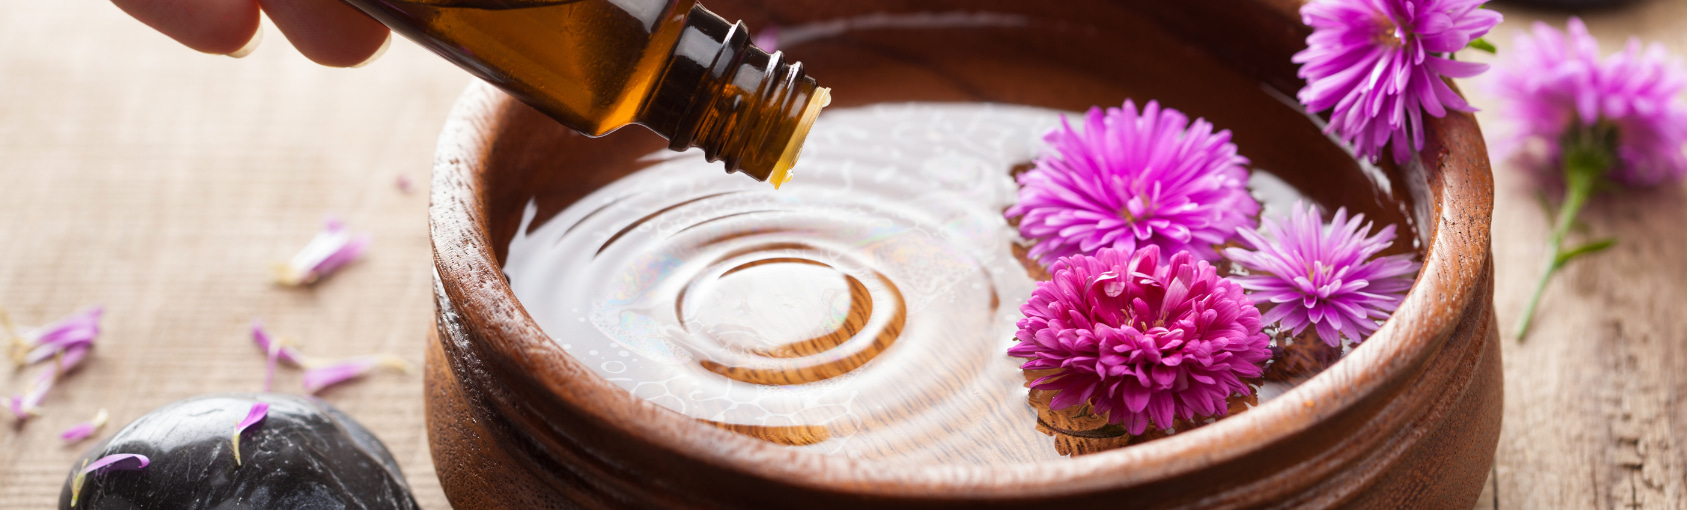 The Effects of Aromatherapy and Meditation